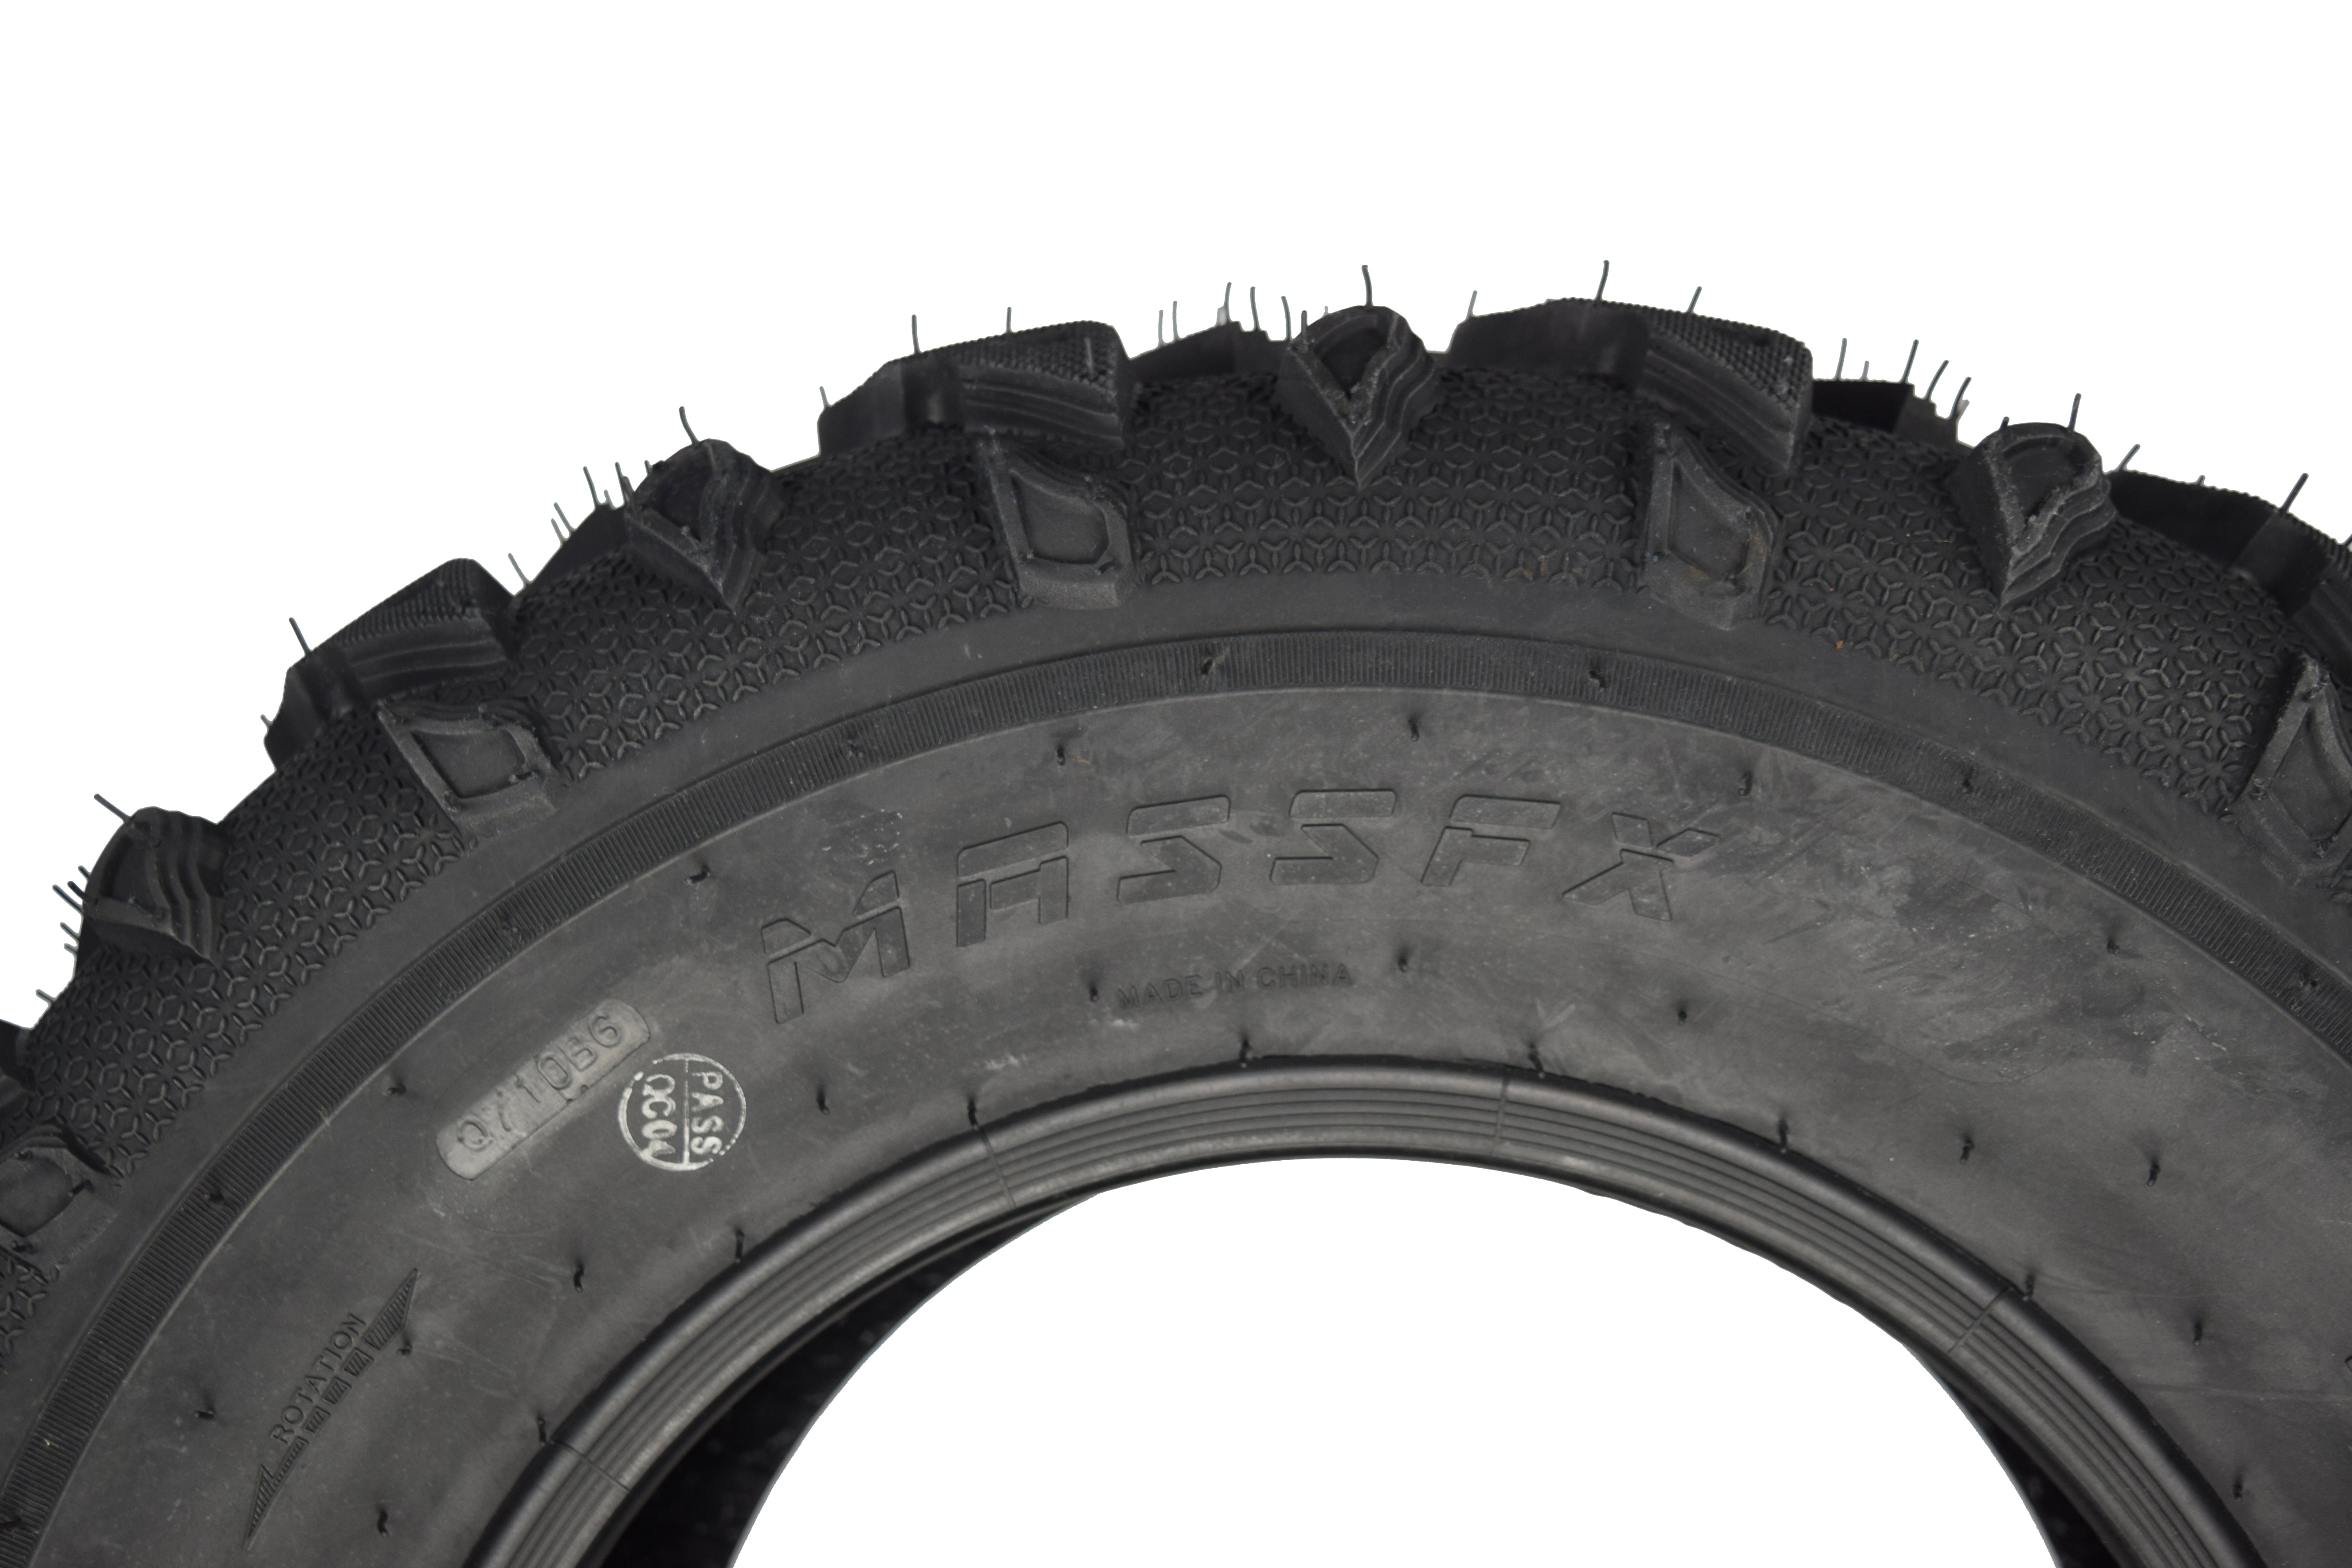 MASSFX Grinder 25x8-12 Front ATV Tire 6 Ply for Soft/Hard Pack Ground (2 Pack)